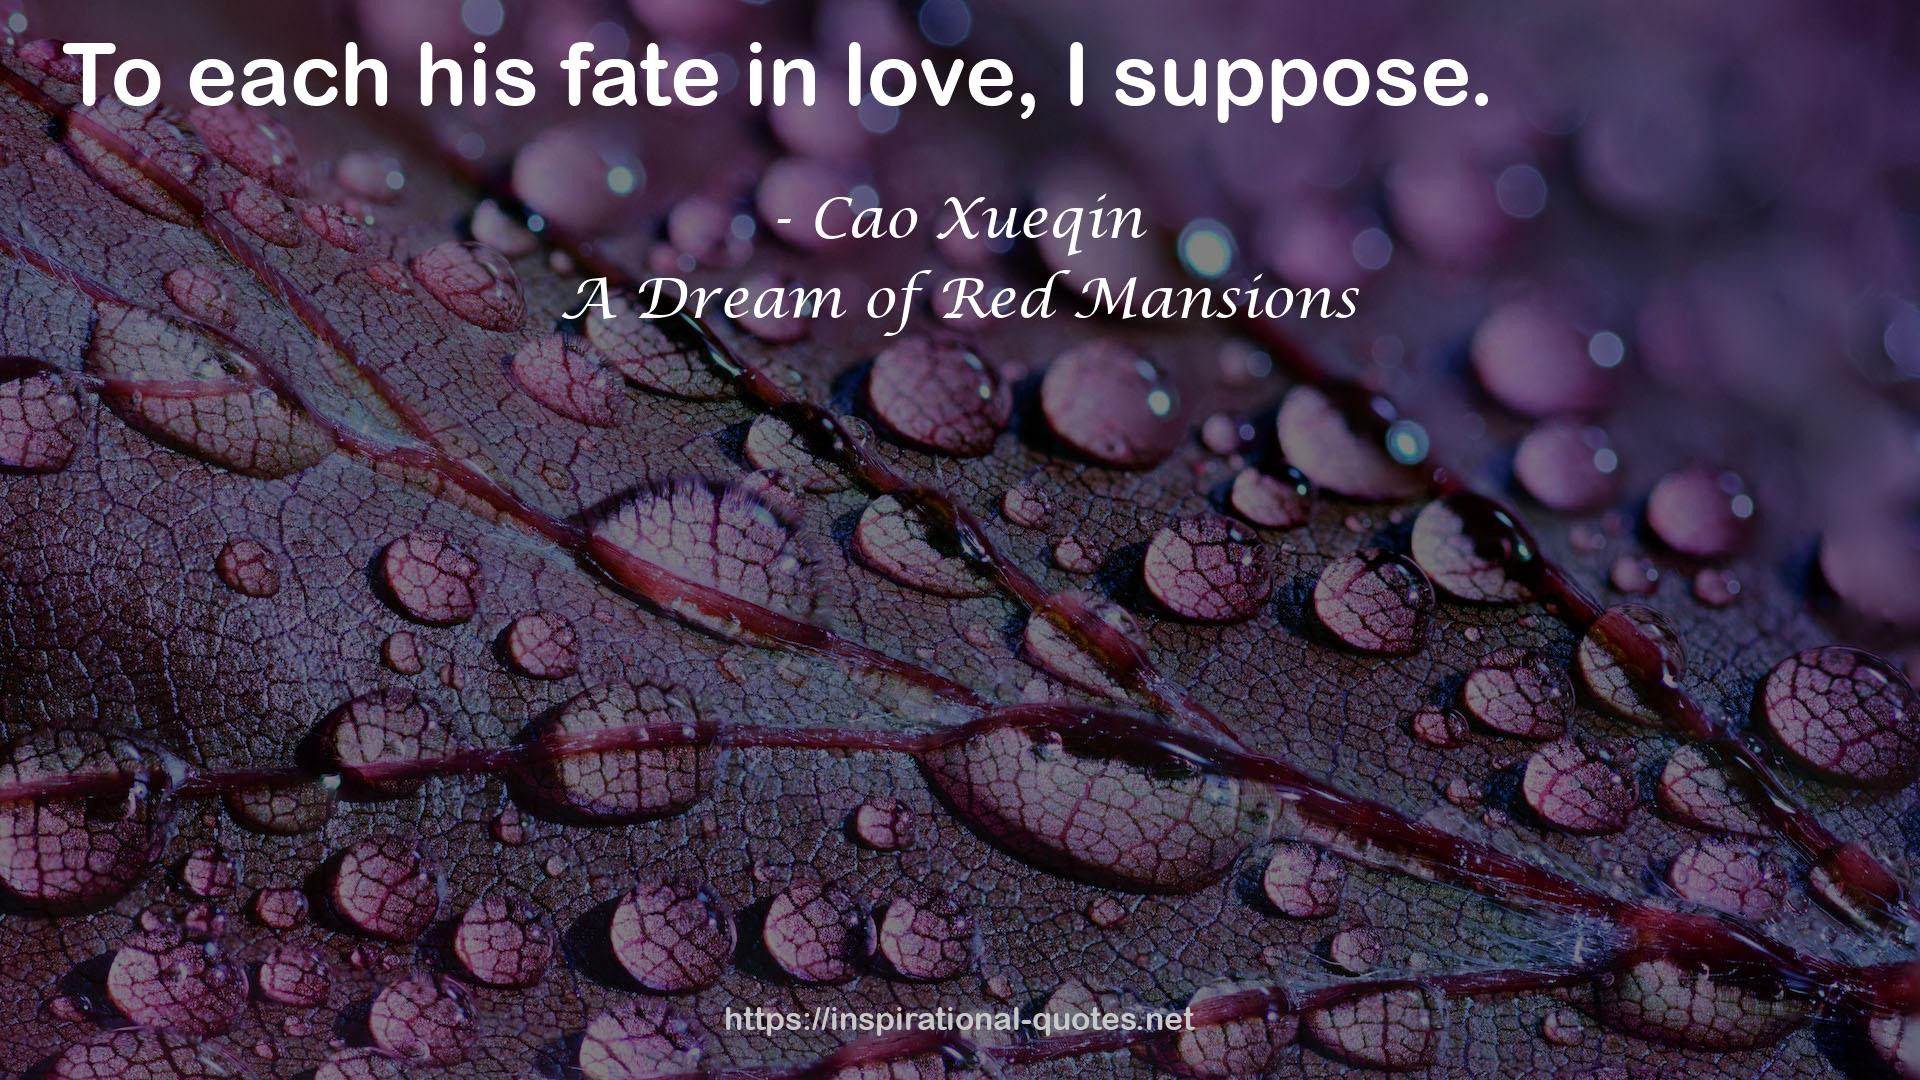 Cao Xueqin QUOTES